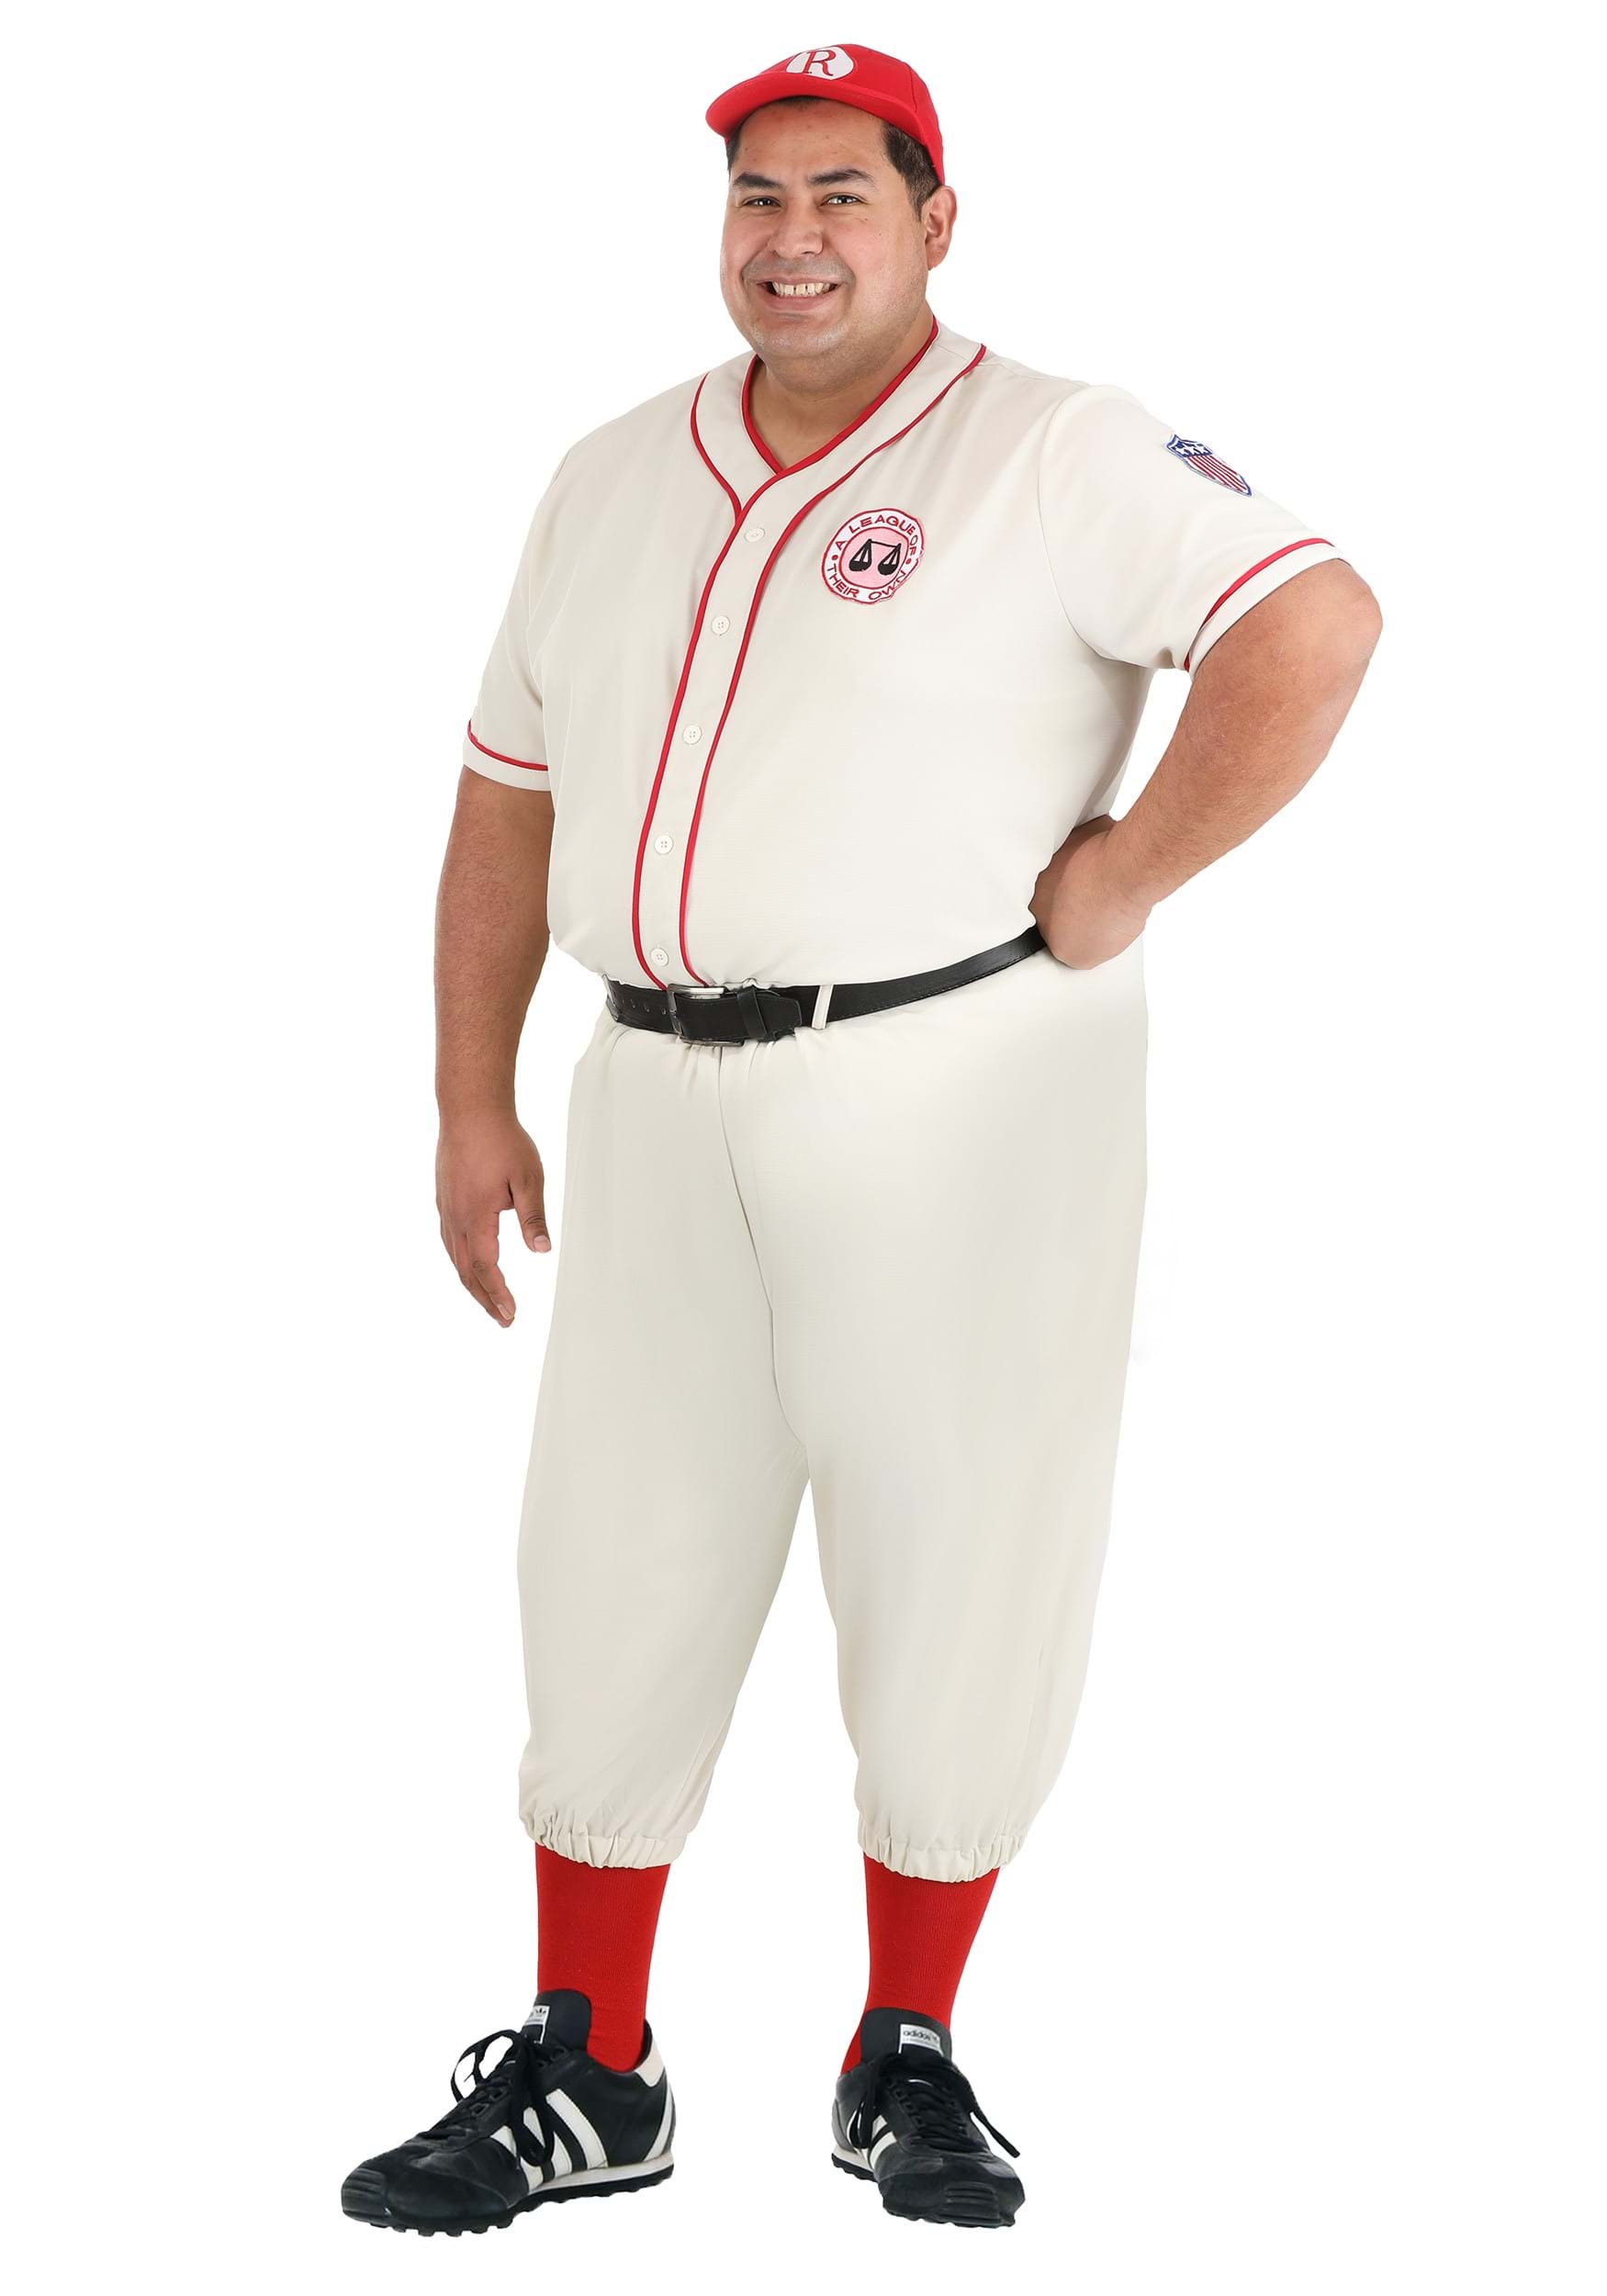 Plus Size Coach Jimmy Costume From A League Of Their Own , Exclusive